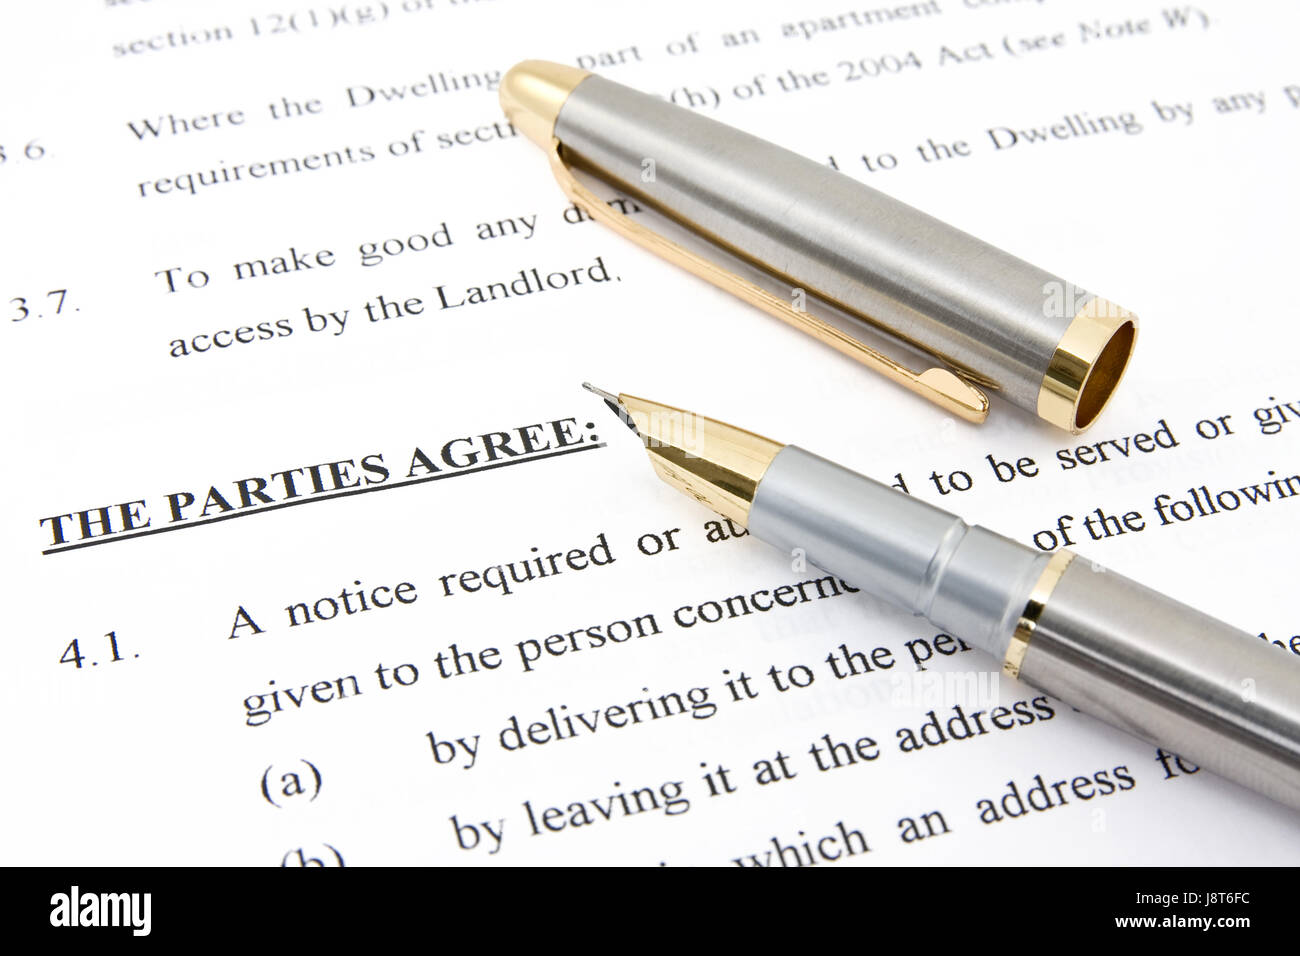 contract, business dealings, deal, business transaction, business, bussiness, Stock Photo